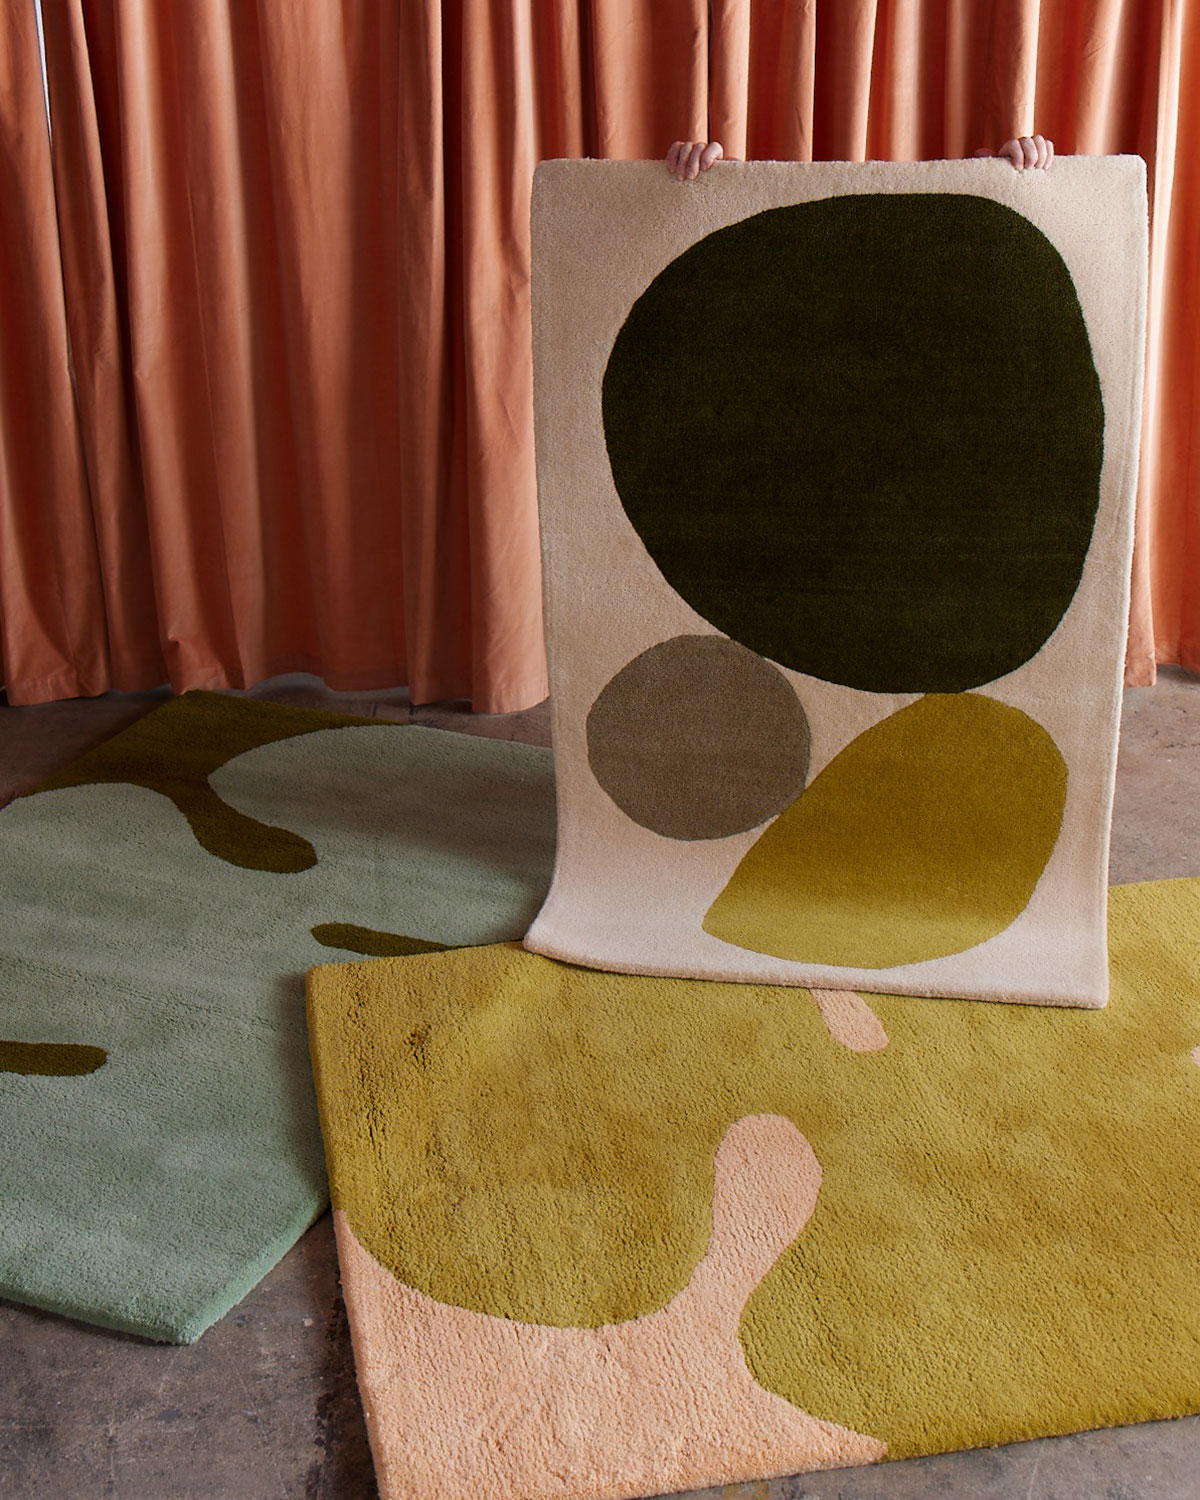 A 3 foot by 5 foot modern rug called Three Stones Moss is being held up by a person